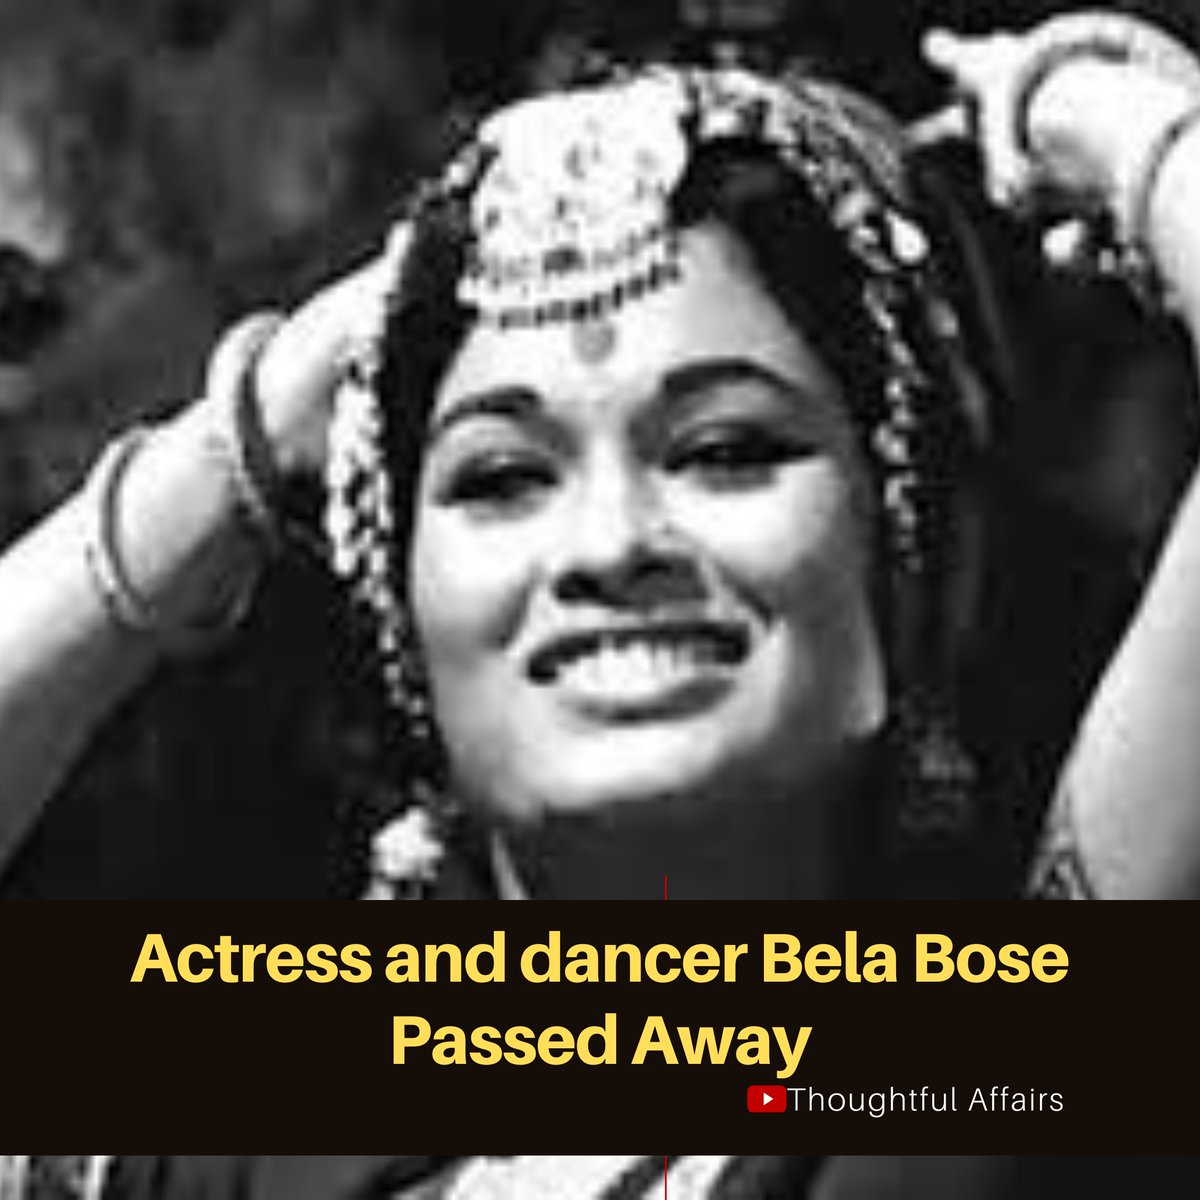 Bollywood Dancer Actress Bela Bose passed away today. To learn more about her visit our channel or follow the link - youtu.be/tDvilTifHaE

#belabose #Dancer #bollywoodactress #bollywoodDancer #bollywoodflashback #bollywoodhistory #dancers #historyofindiancinema